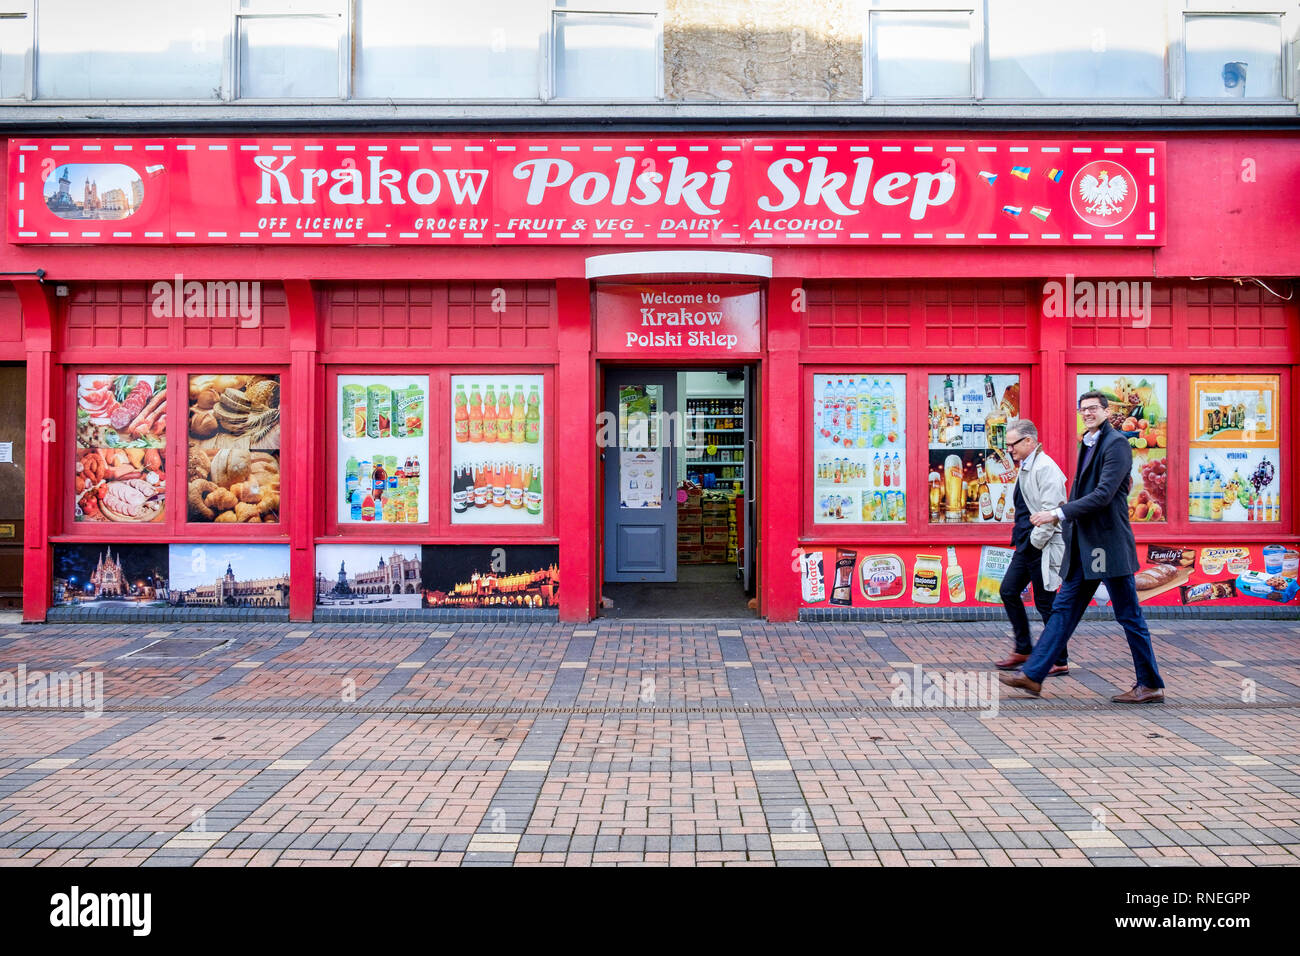 Swindon, Wiltshire, UK. 19th February, 2019. On the day that Honda has confirmed that they will be closing their car factory in the town two men are pictured walking past a Polish grocery shop in the town centre. Swindon was one of the first areas to declare a Leave result in the 2016 EU referendum. Many in the local community are worried that the job losses at Honda will have a catastrophic impact on the town. Credit: Lynchpics/Alamy Live News Stock Photo